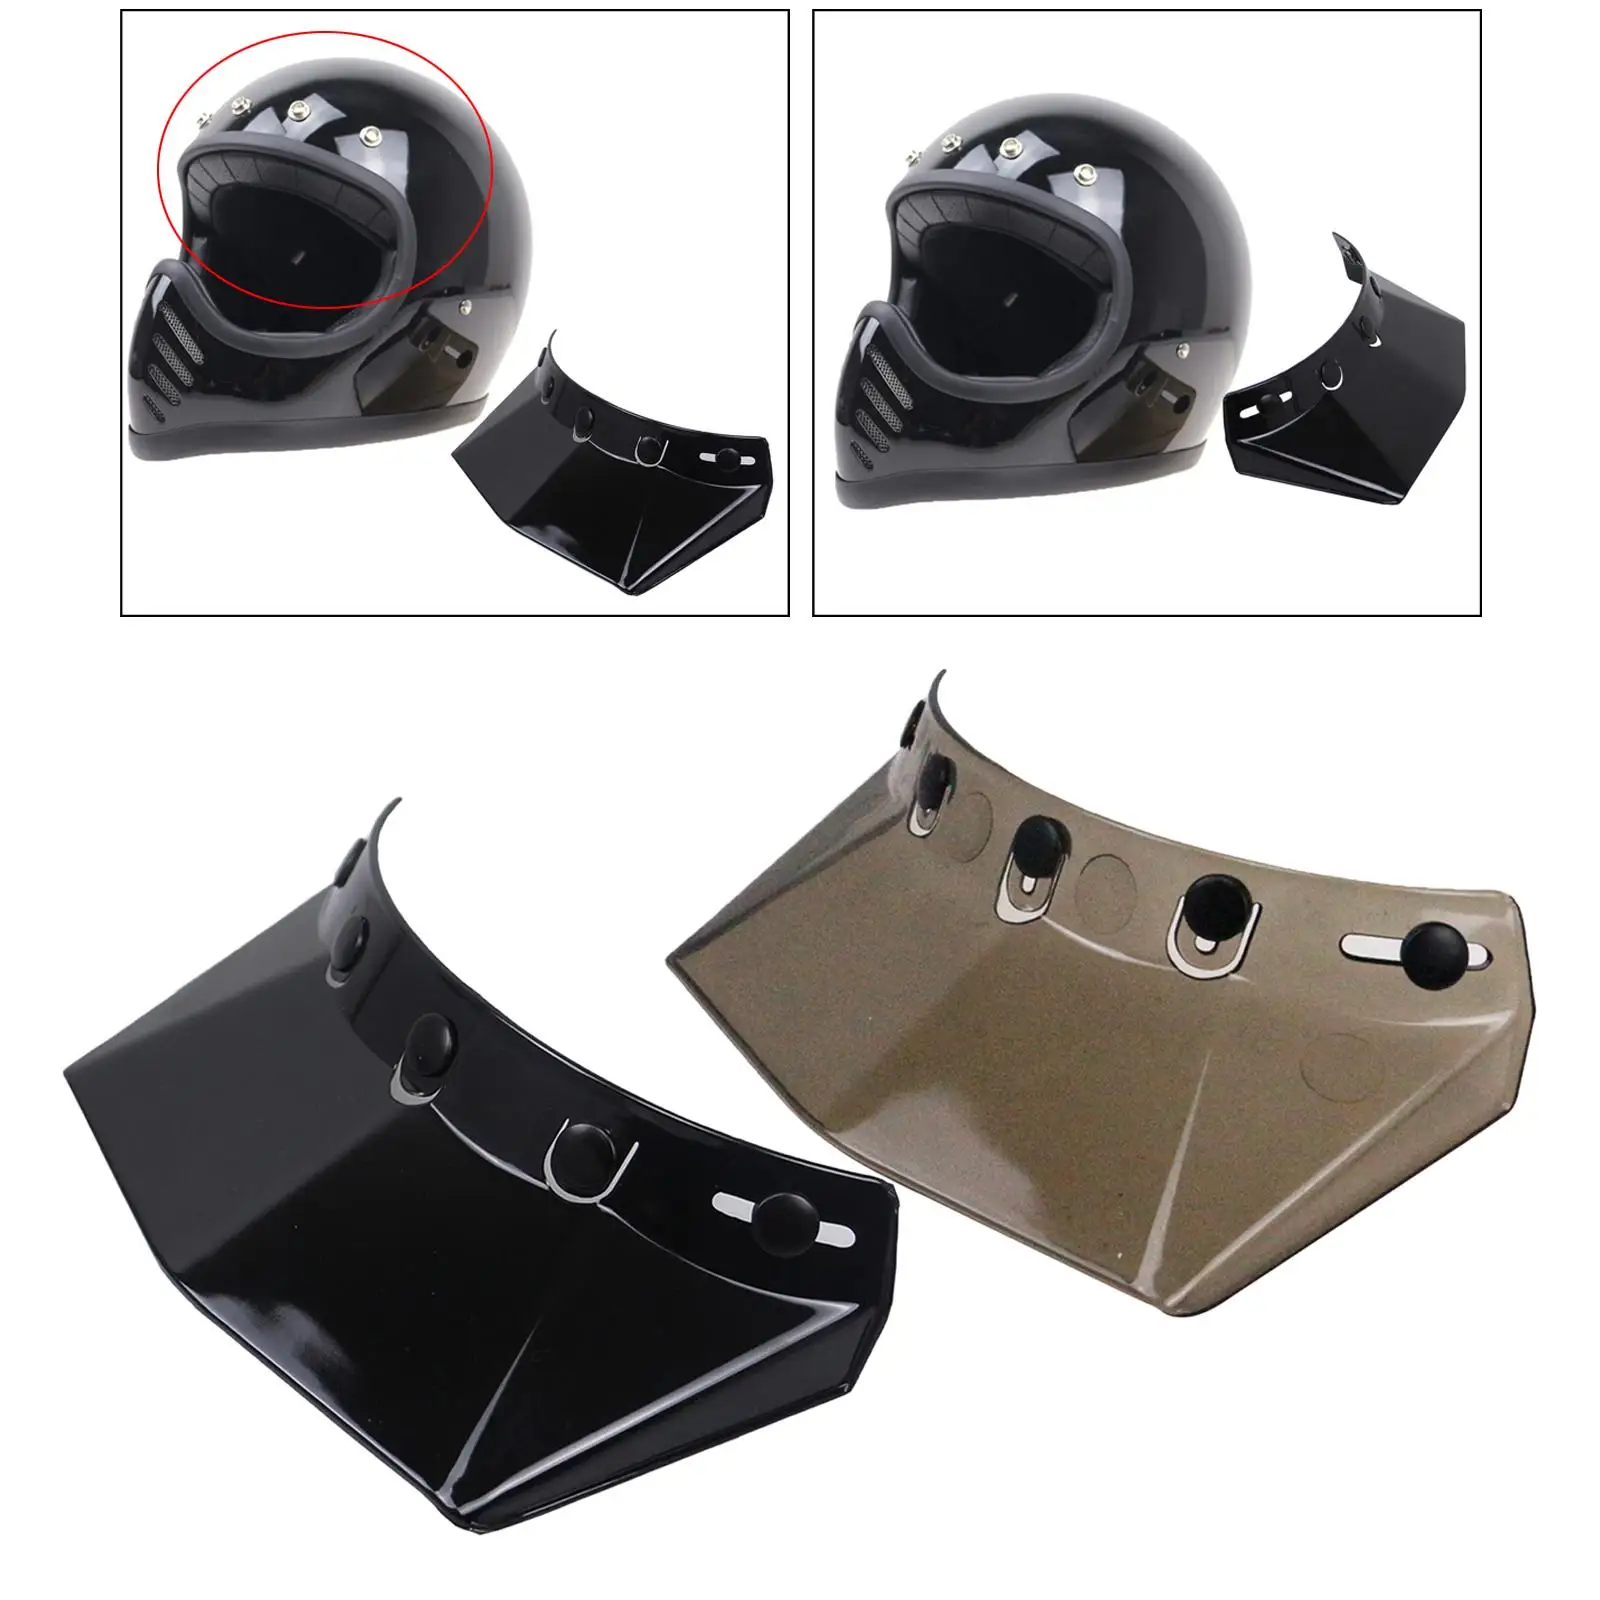 2Pcs Motorbike 5 Snap Visor Peak Replace for  Open   Motorcycle Accessories